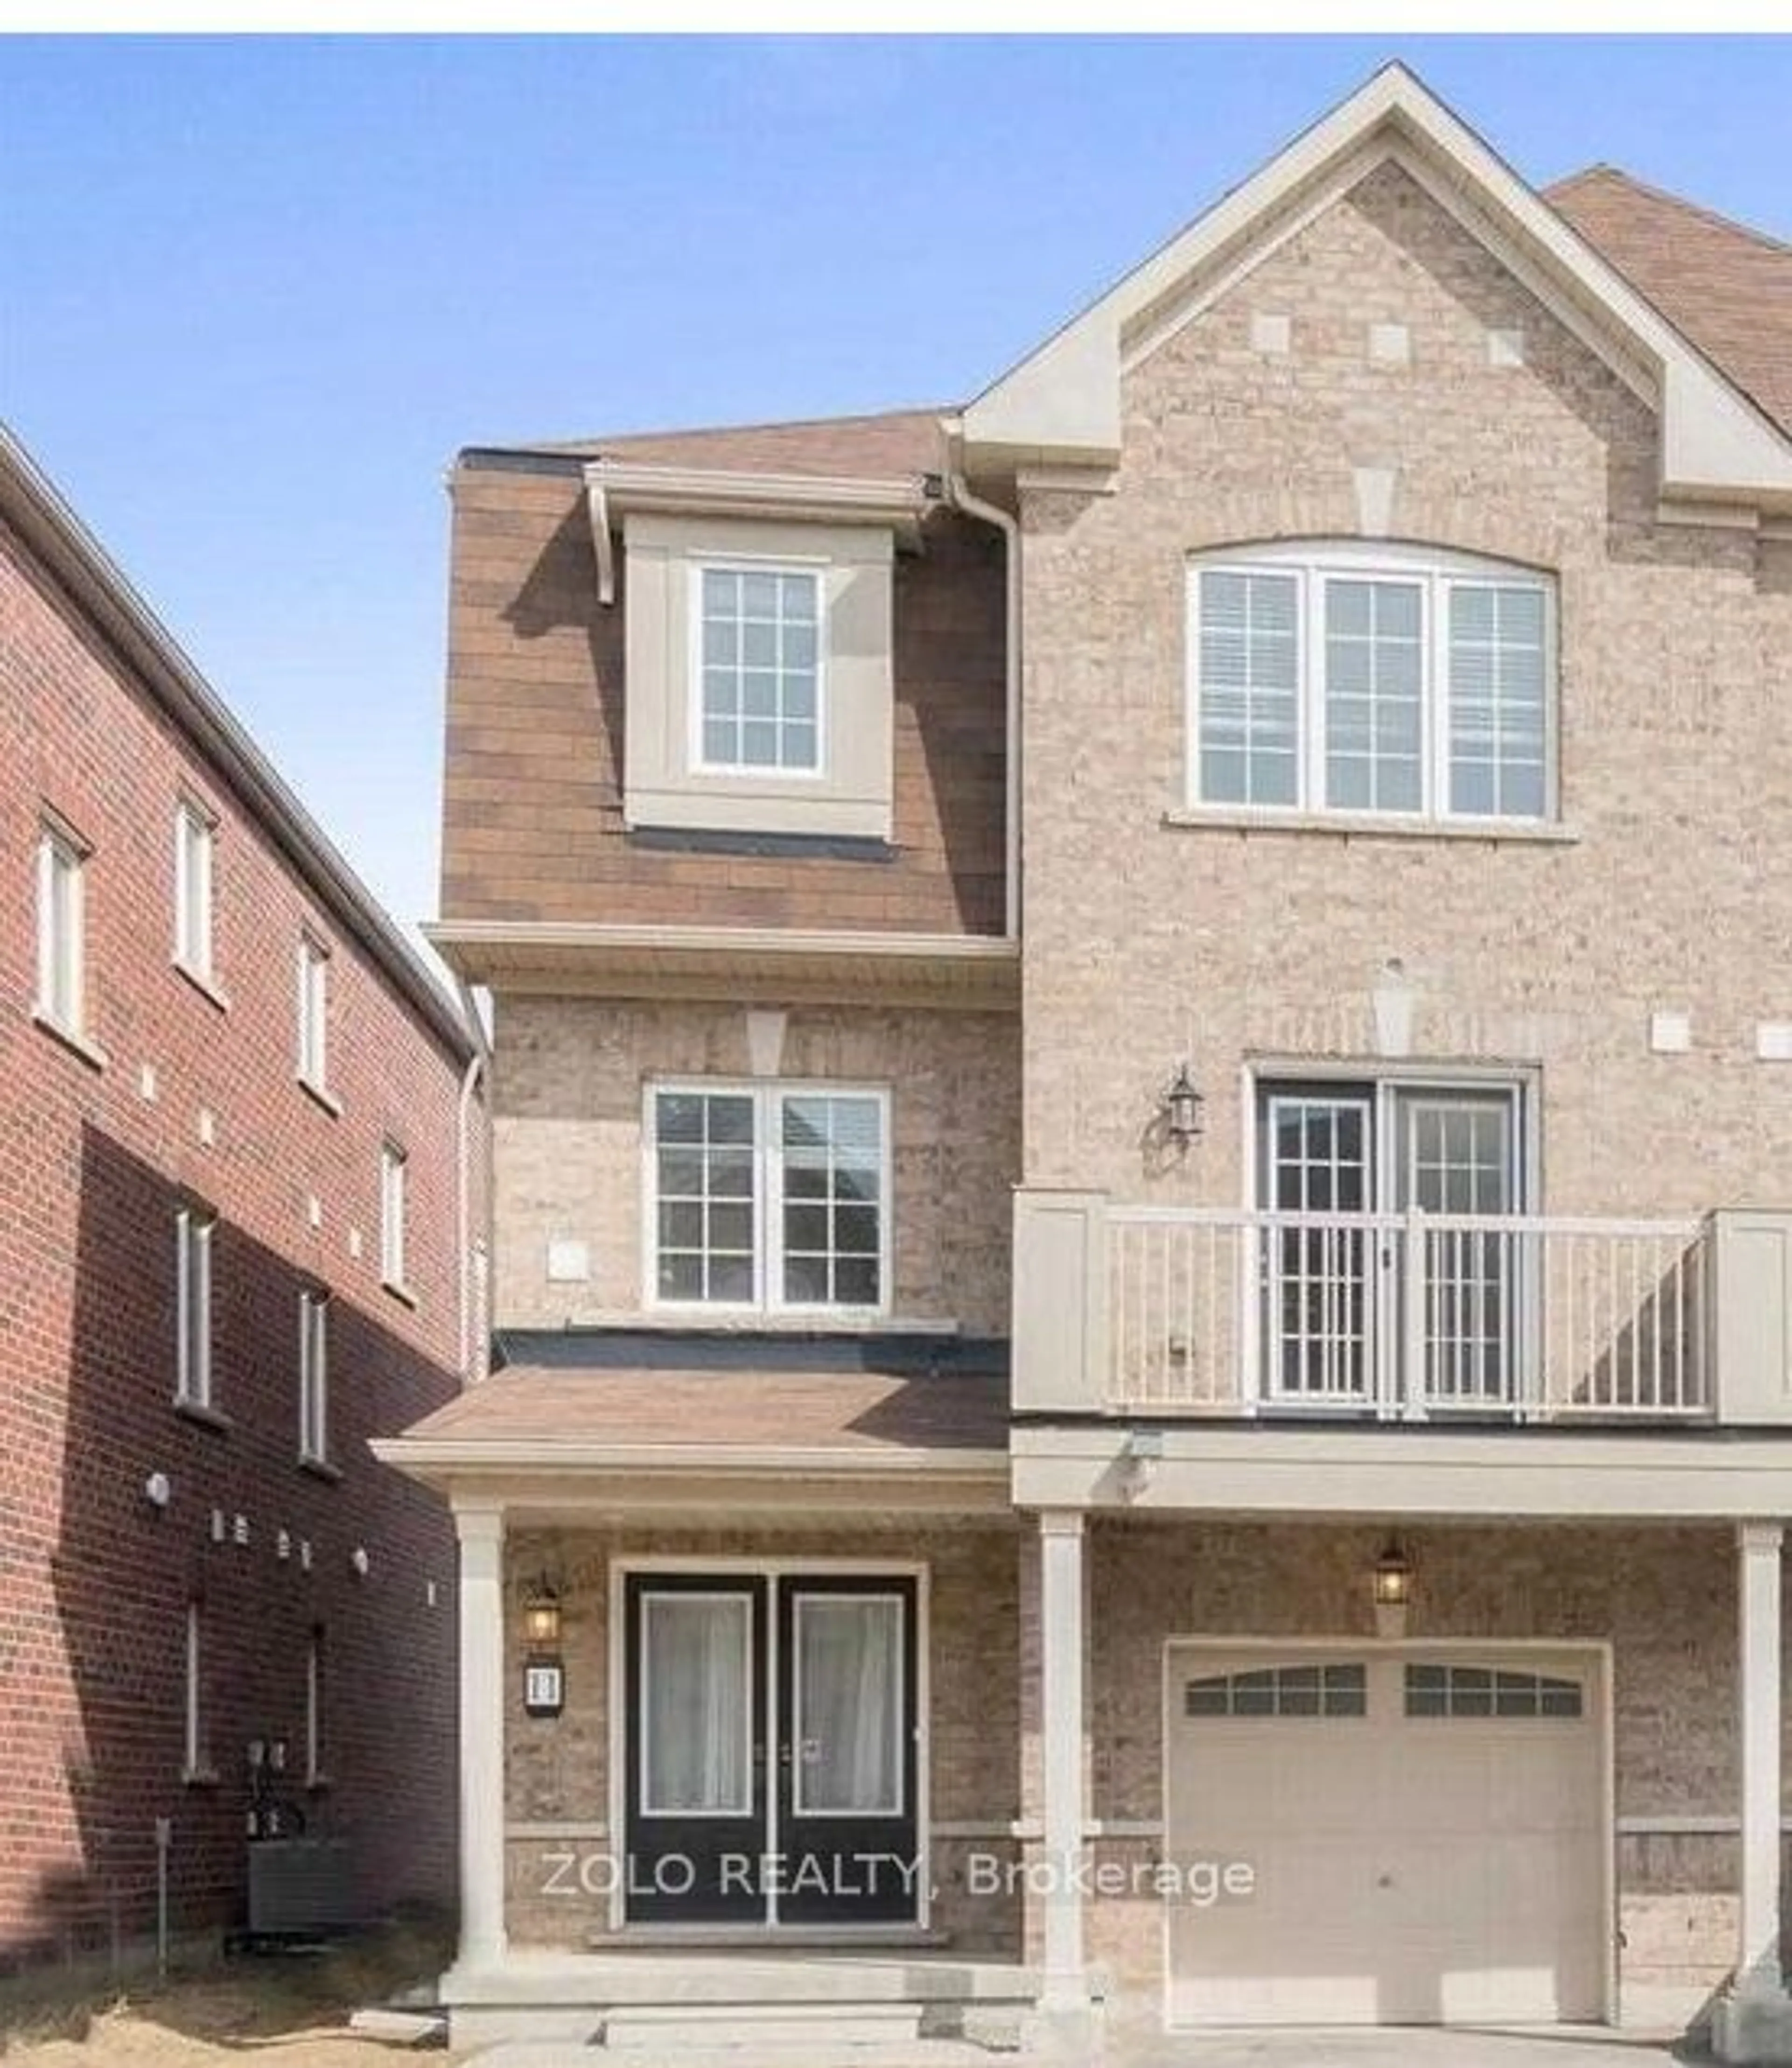 Home with brick exterior material for 11 Francesco St, Brampton Ontario L7A 4N7